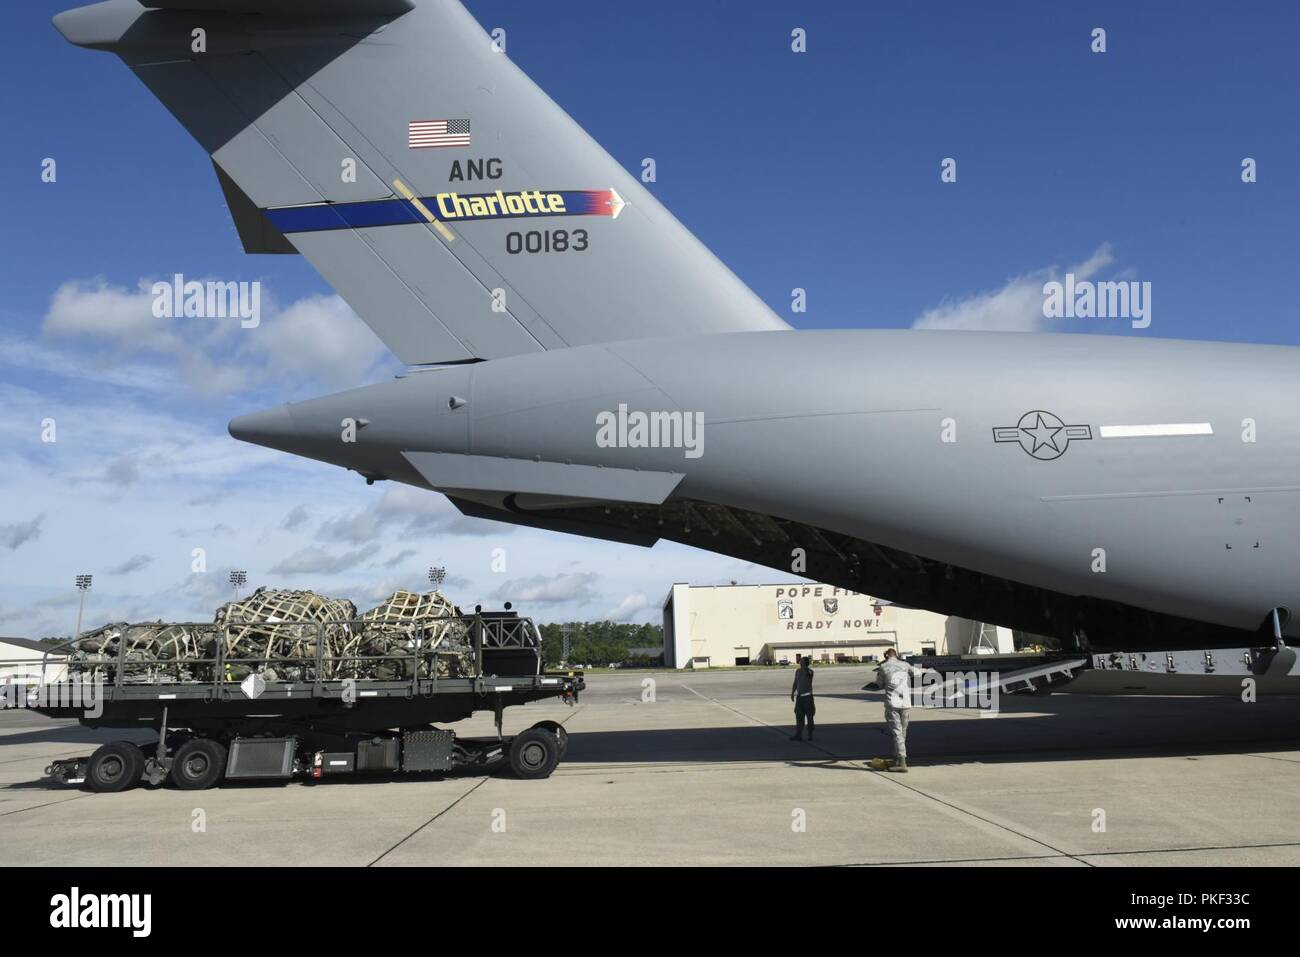 Three pallets of Army luggage is loaded aboard a North Carolina Air National Guard (NCANG) C-17 Globemaster III Aircraft as part of the very first C-17 mission for the NCANG to Pope Army Airfield, while at Pope Army Airfield, Fayetteville North Carolina, August 1, 2018. The mission to Pope Field is the first of what is hoped to be many, by October the 145th Airlift Wing plans to begin supporting Airdrop missions with weekly flights to Pope Field, picking up Soldiers and Cargo for regular Airborne operations. Stock Photo